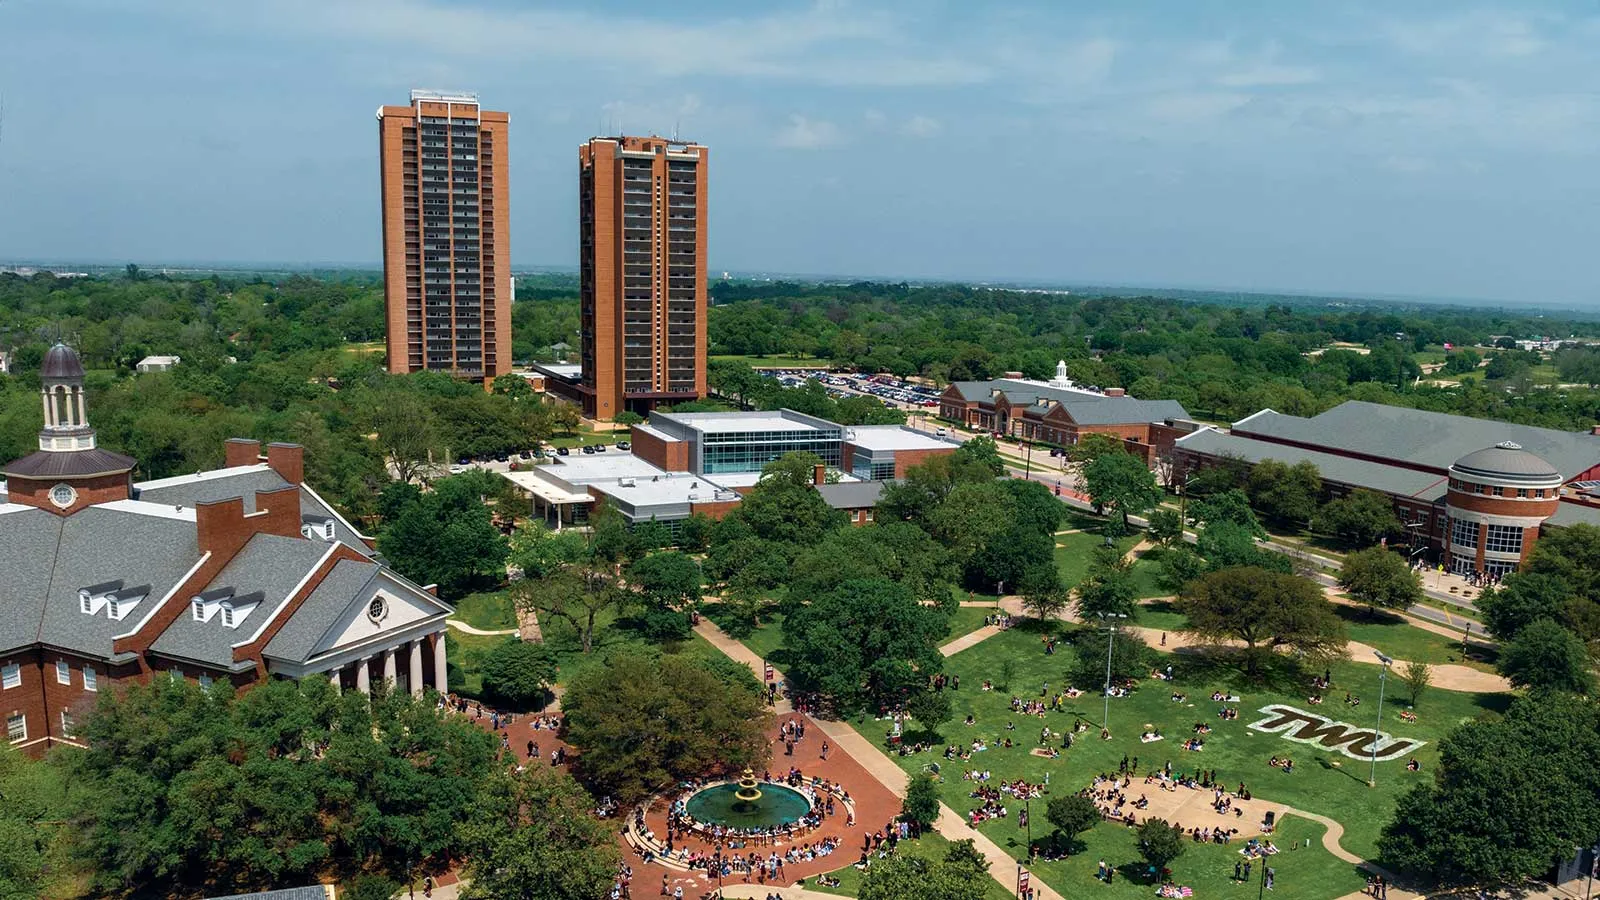 The TWU Denton campus skyline with Stark and Guinn Hall in the background and students lounging on the green lawns.